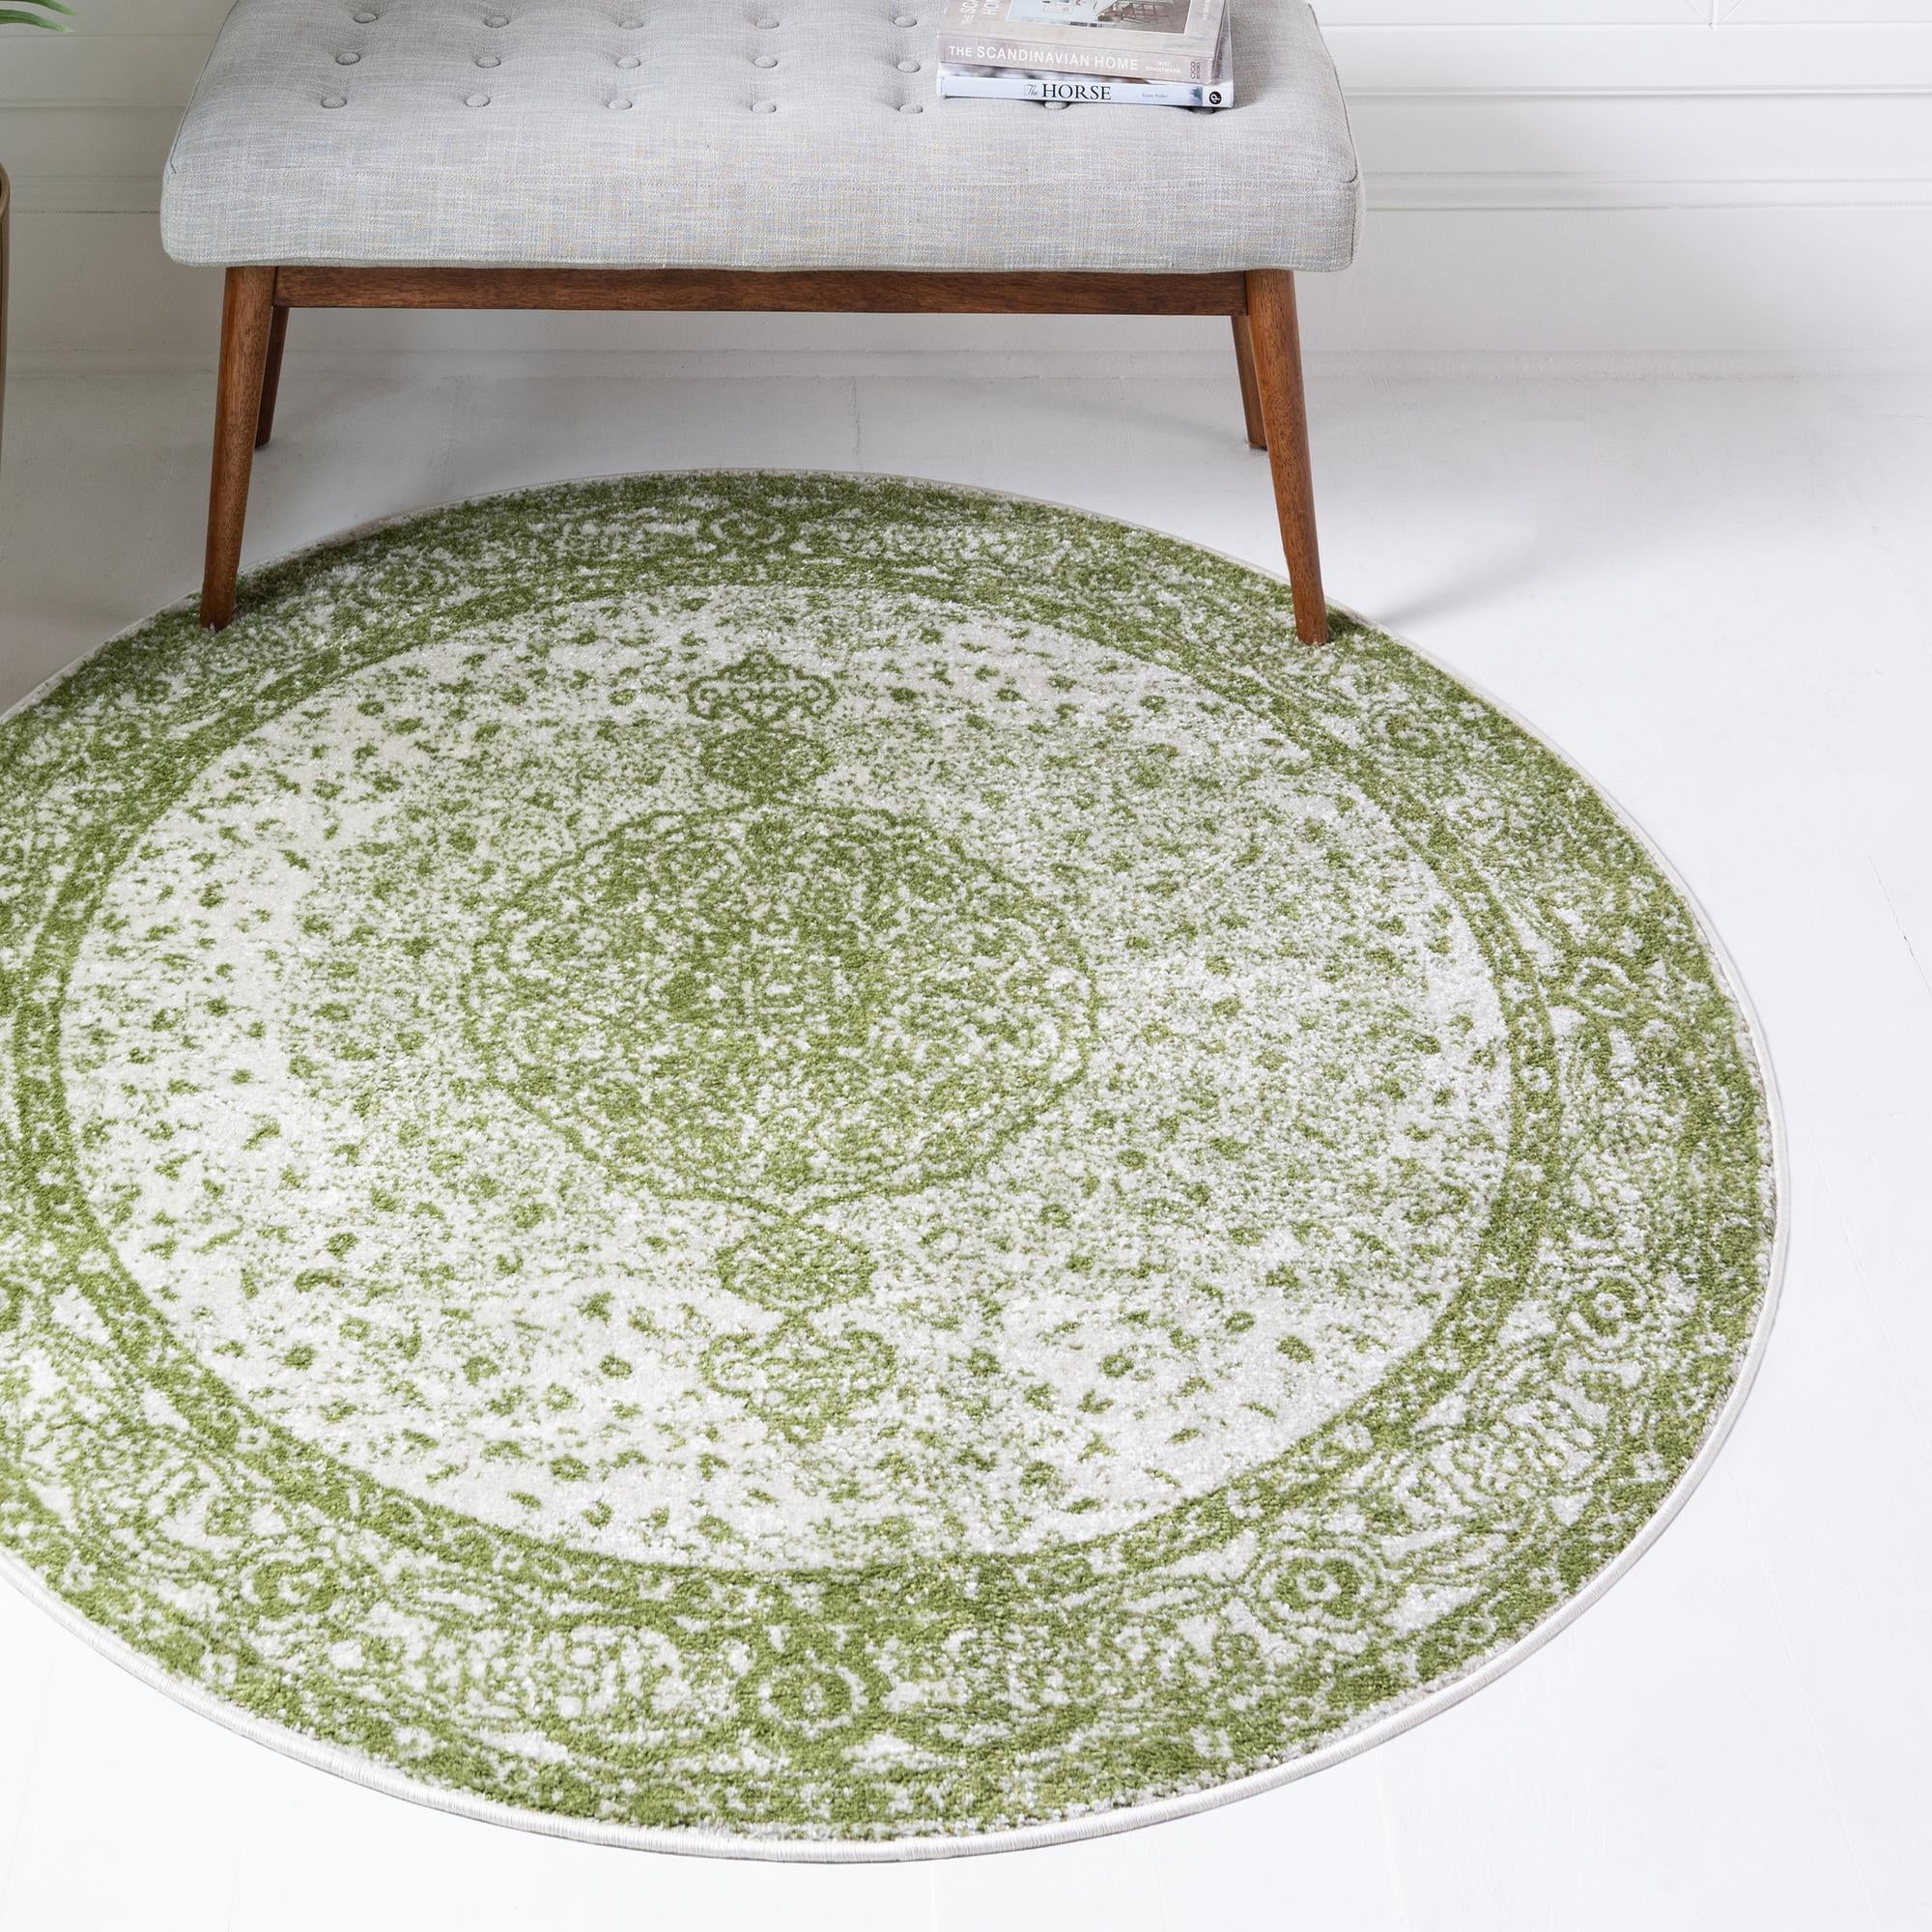 Dover Rugs Reviews | Bryont Blog